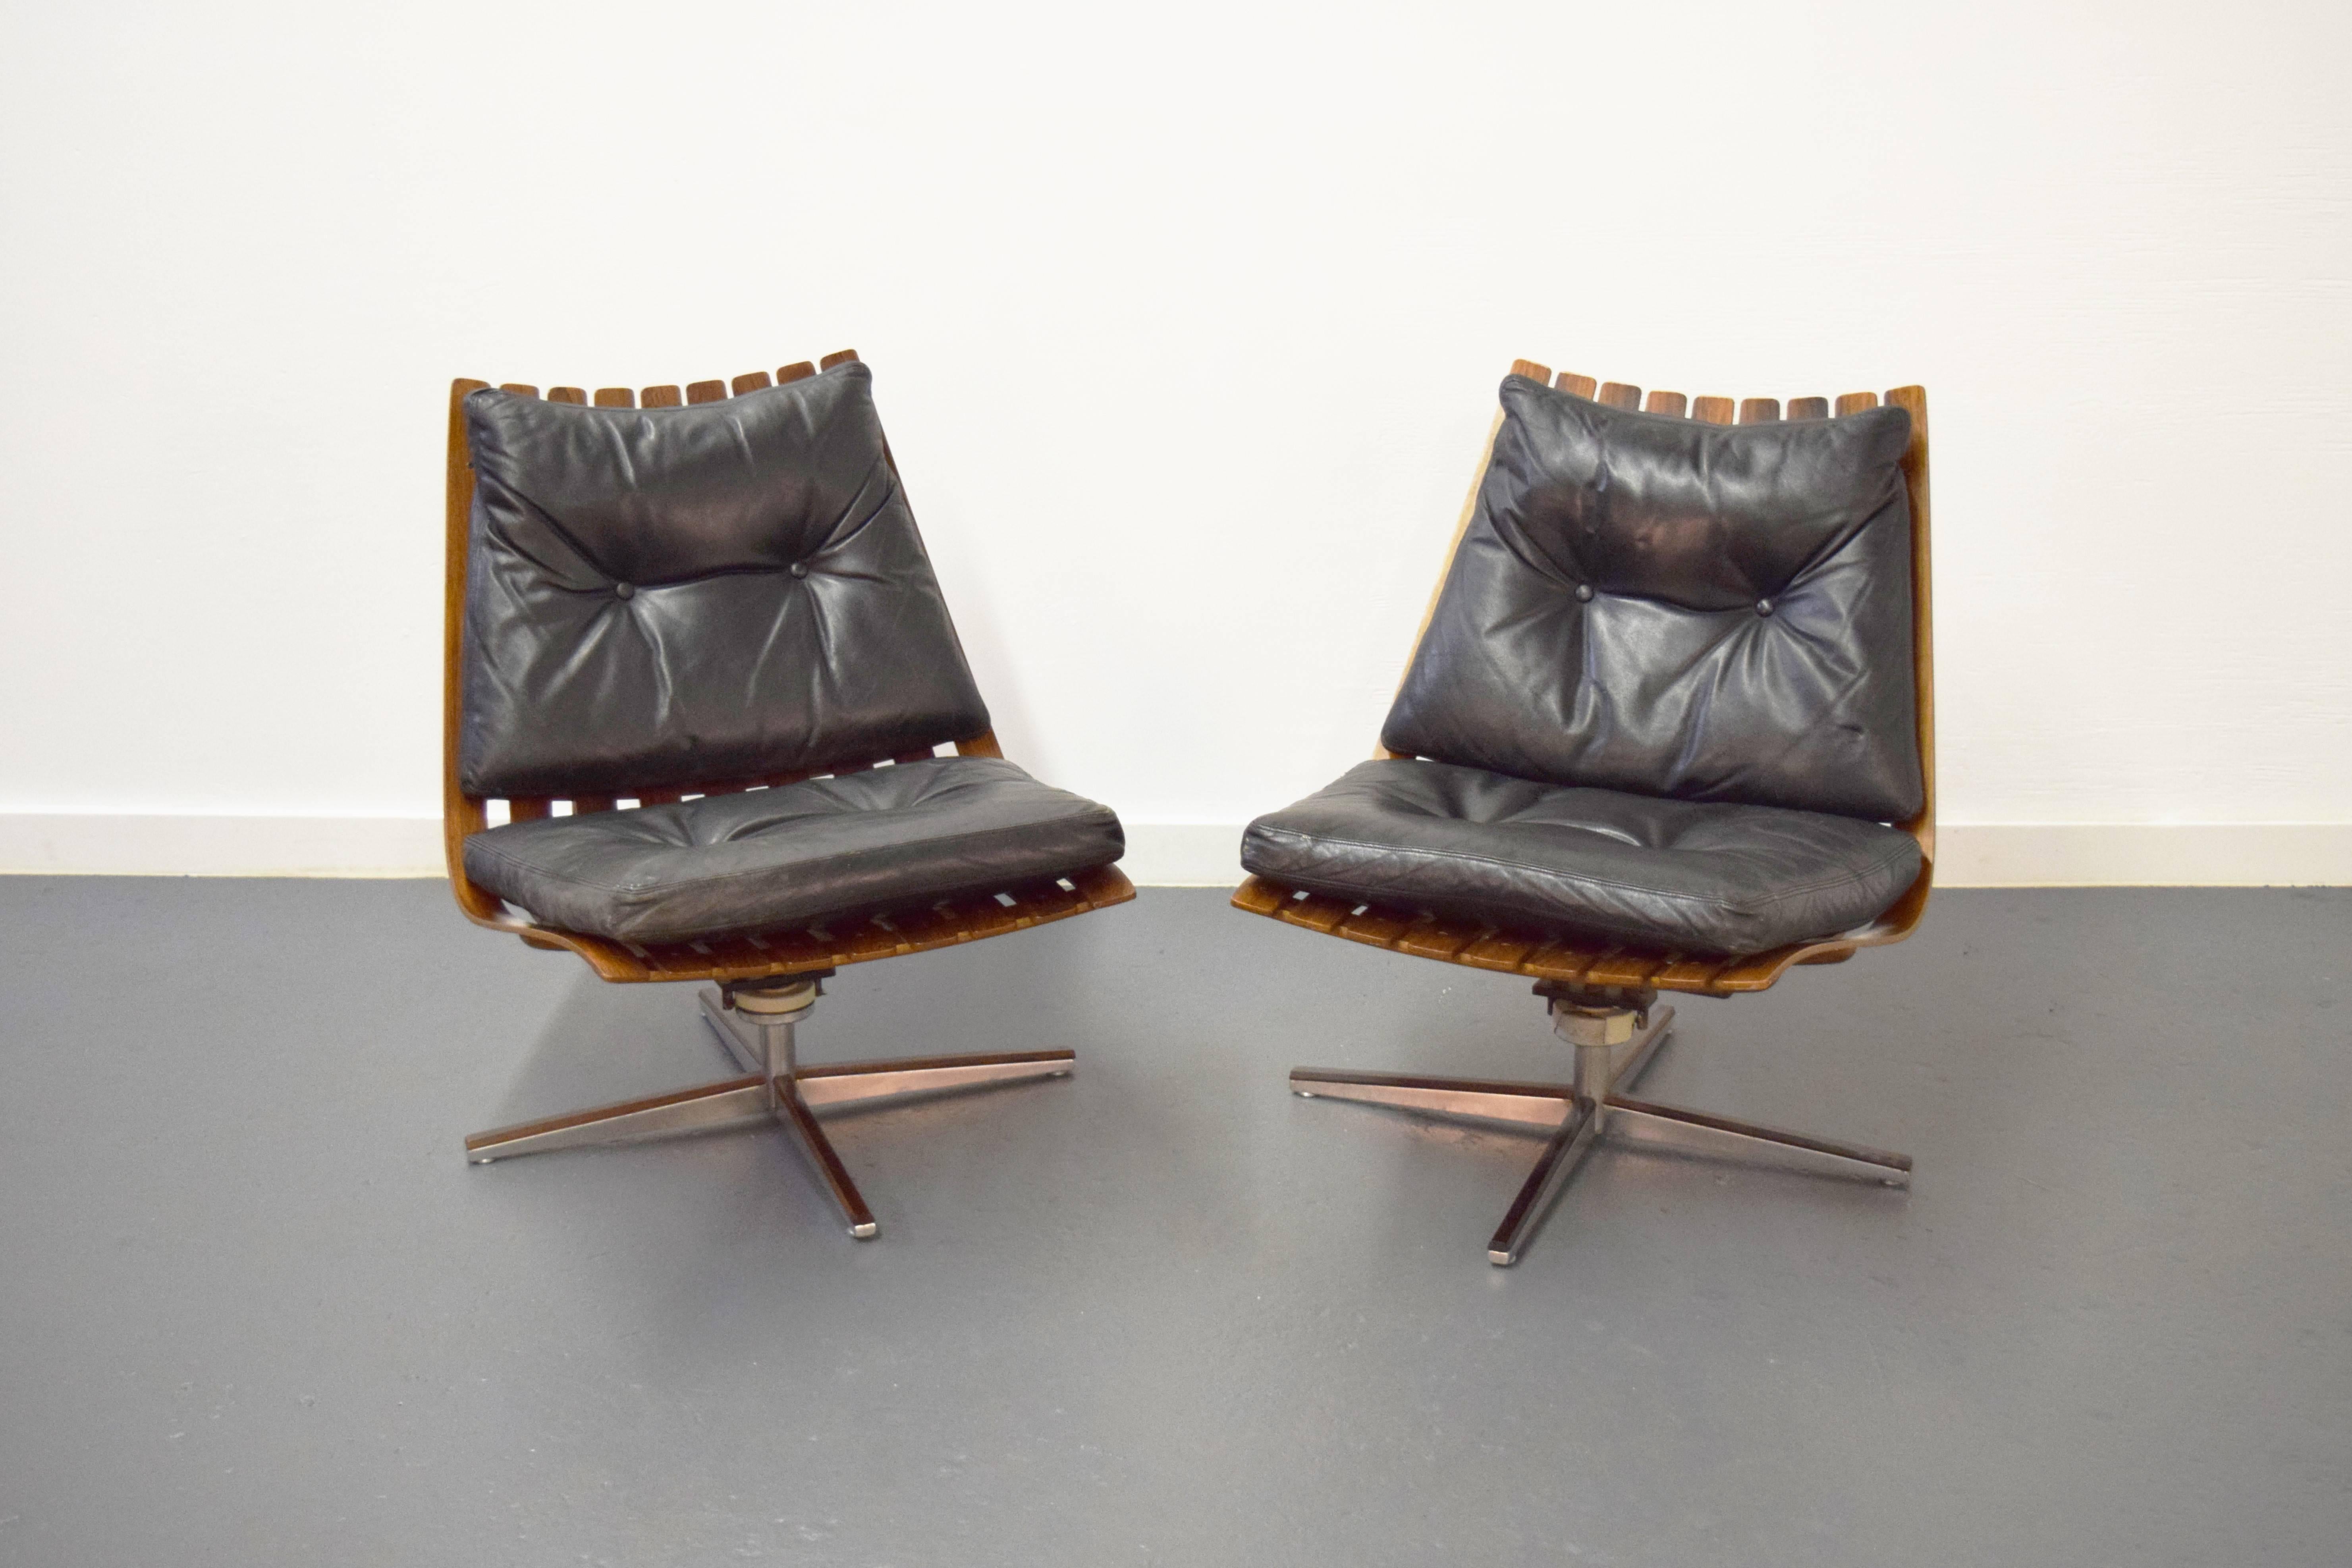 Pair of Hans Brattrud rosewood swivel lounge chairs. Chairs have original black leather cushions.